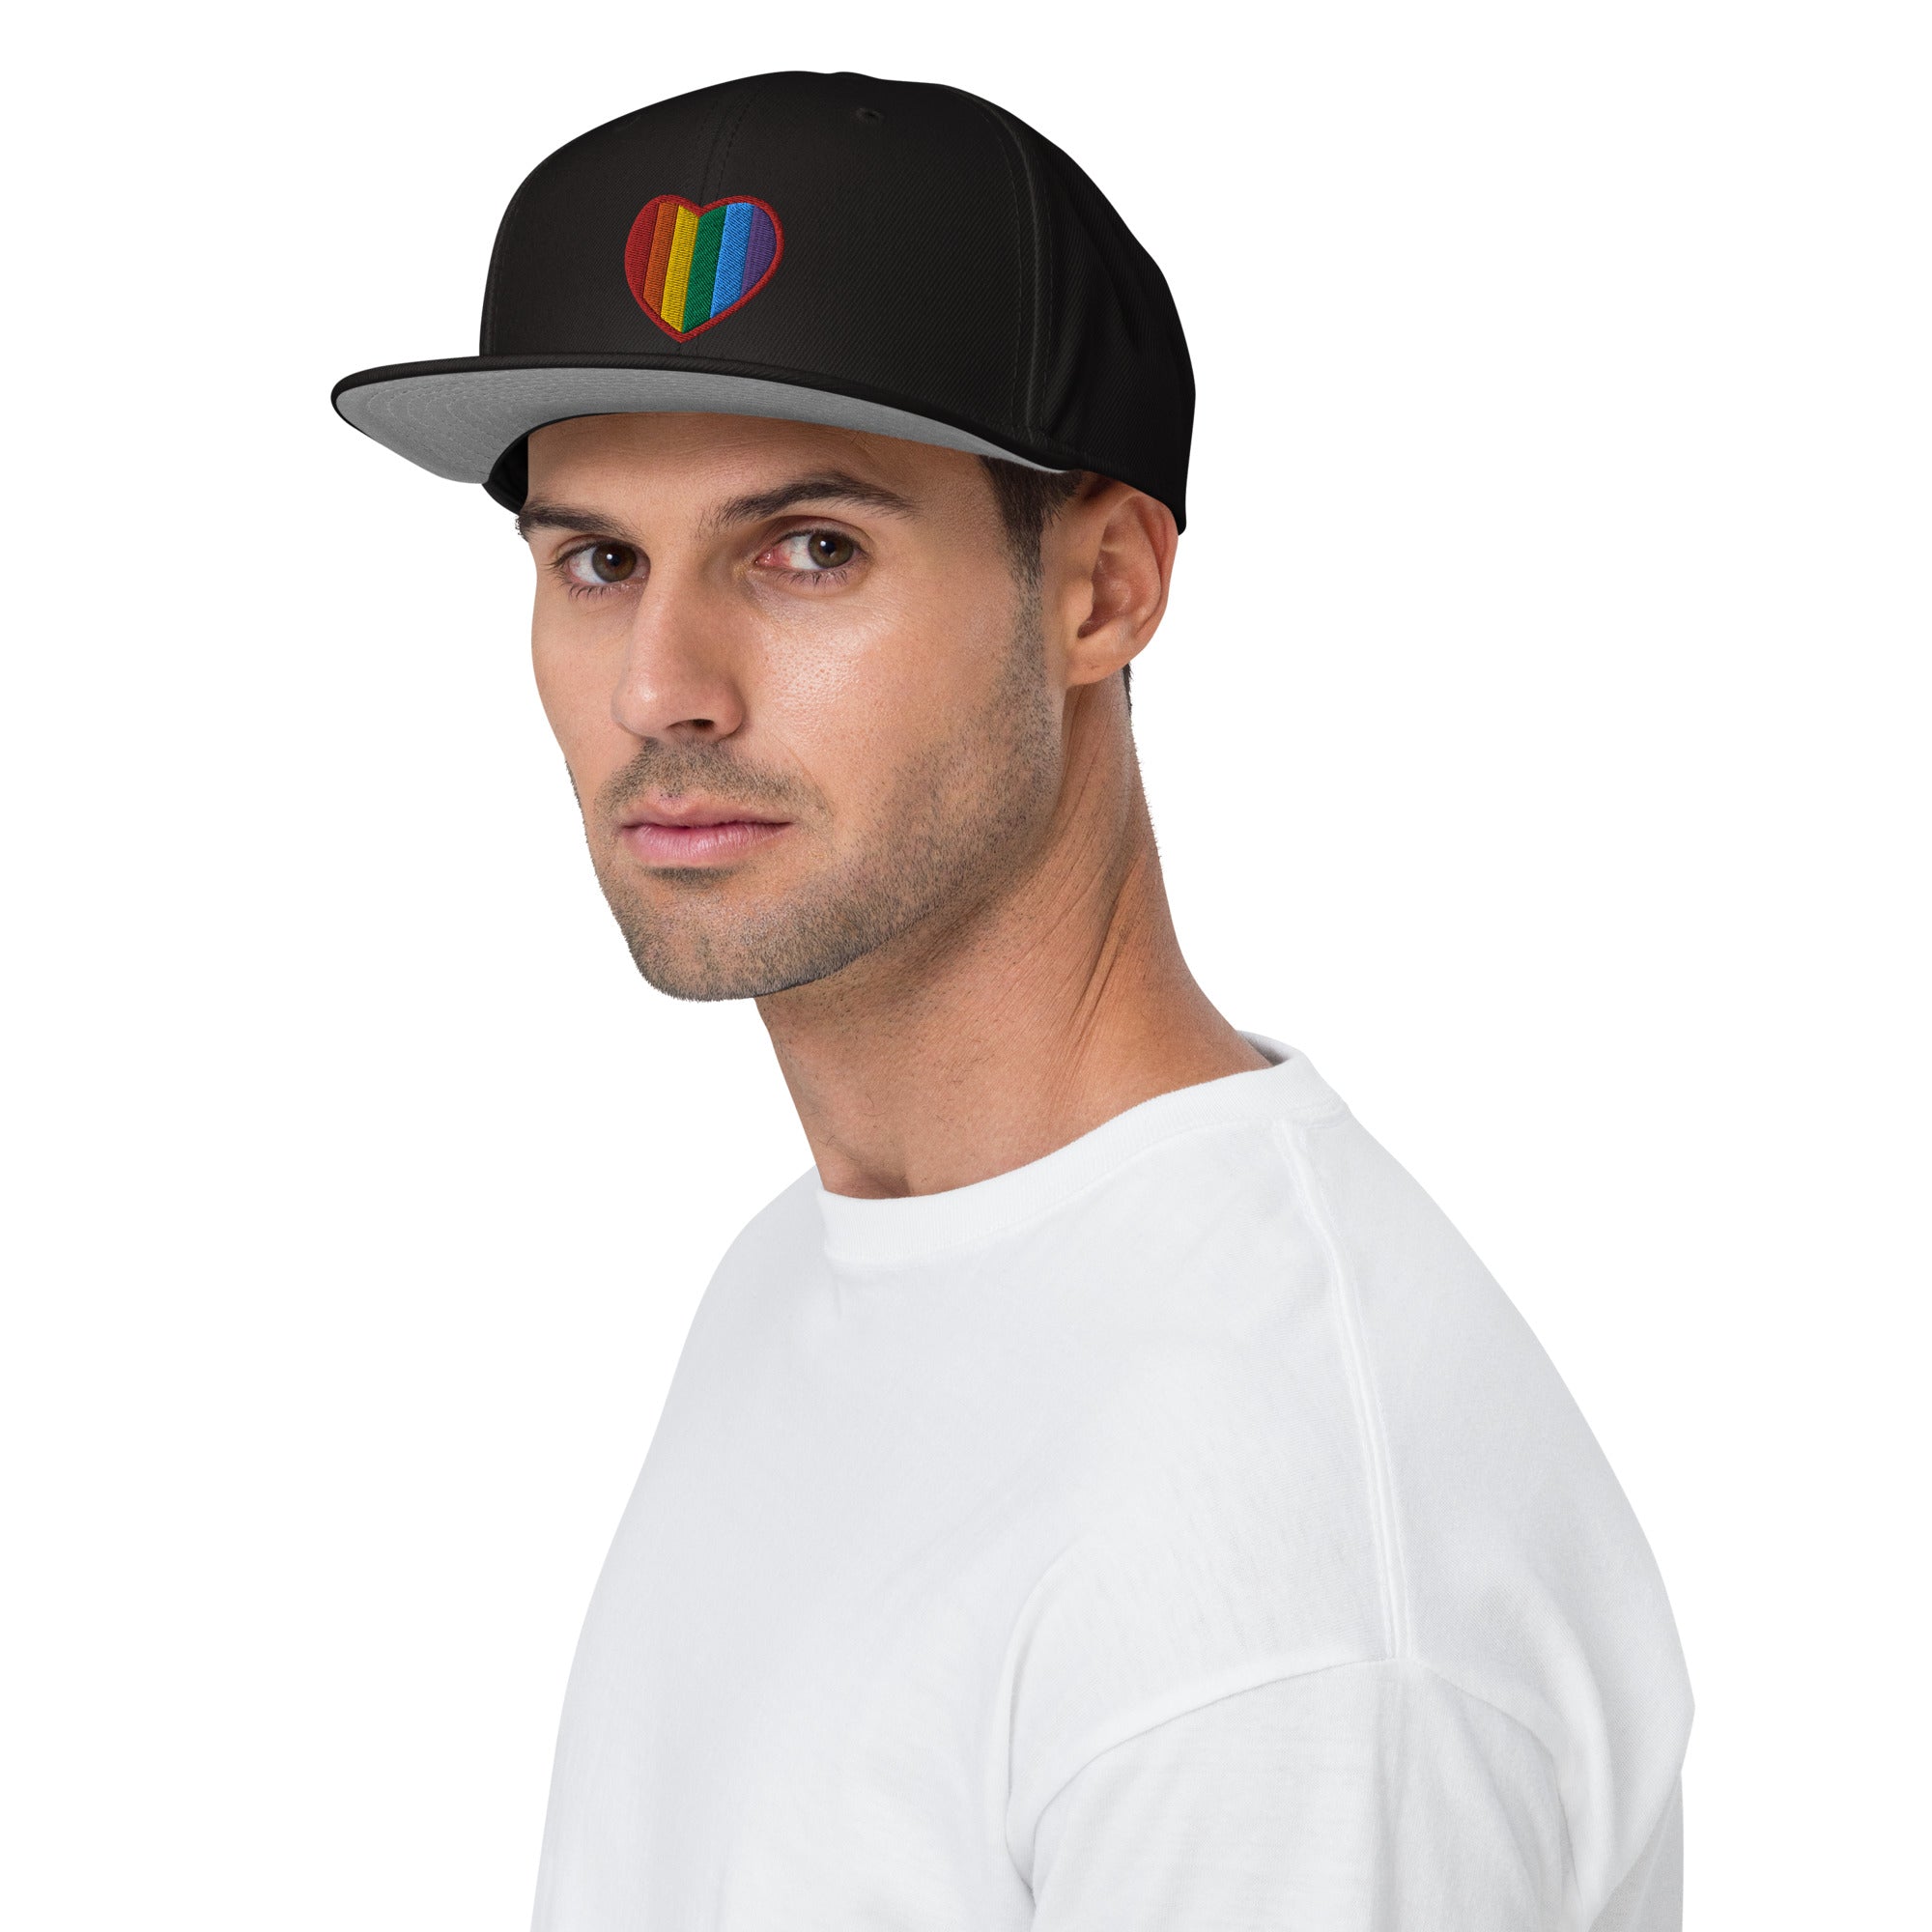 Gay Pride Rainbow Colors Heart Embroidered Flat Bill Cap Snapback Hat